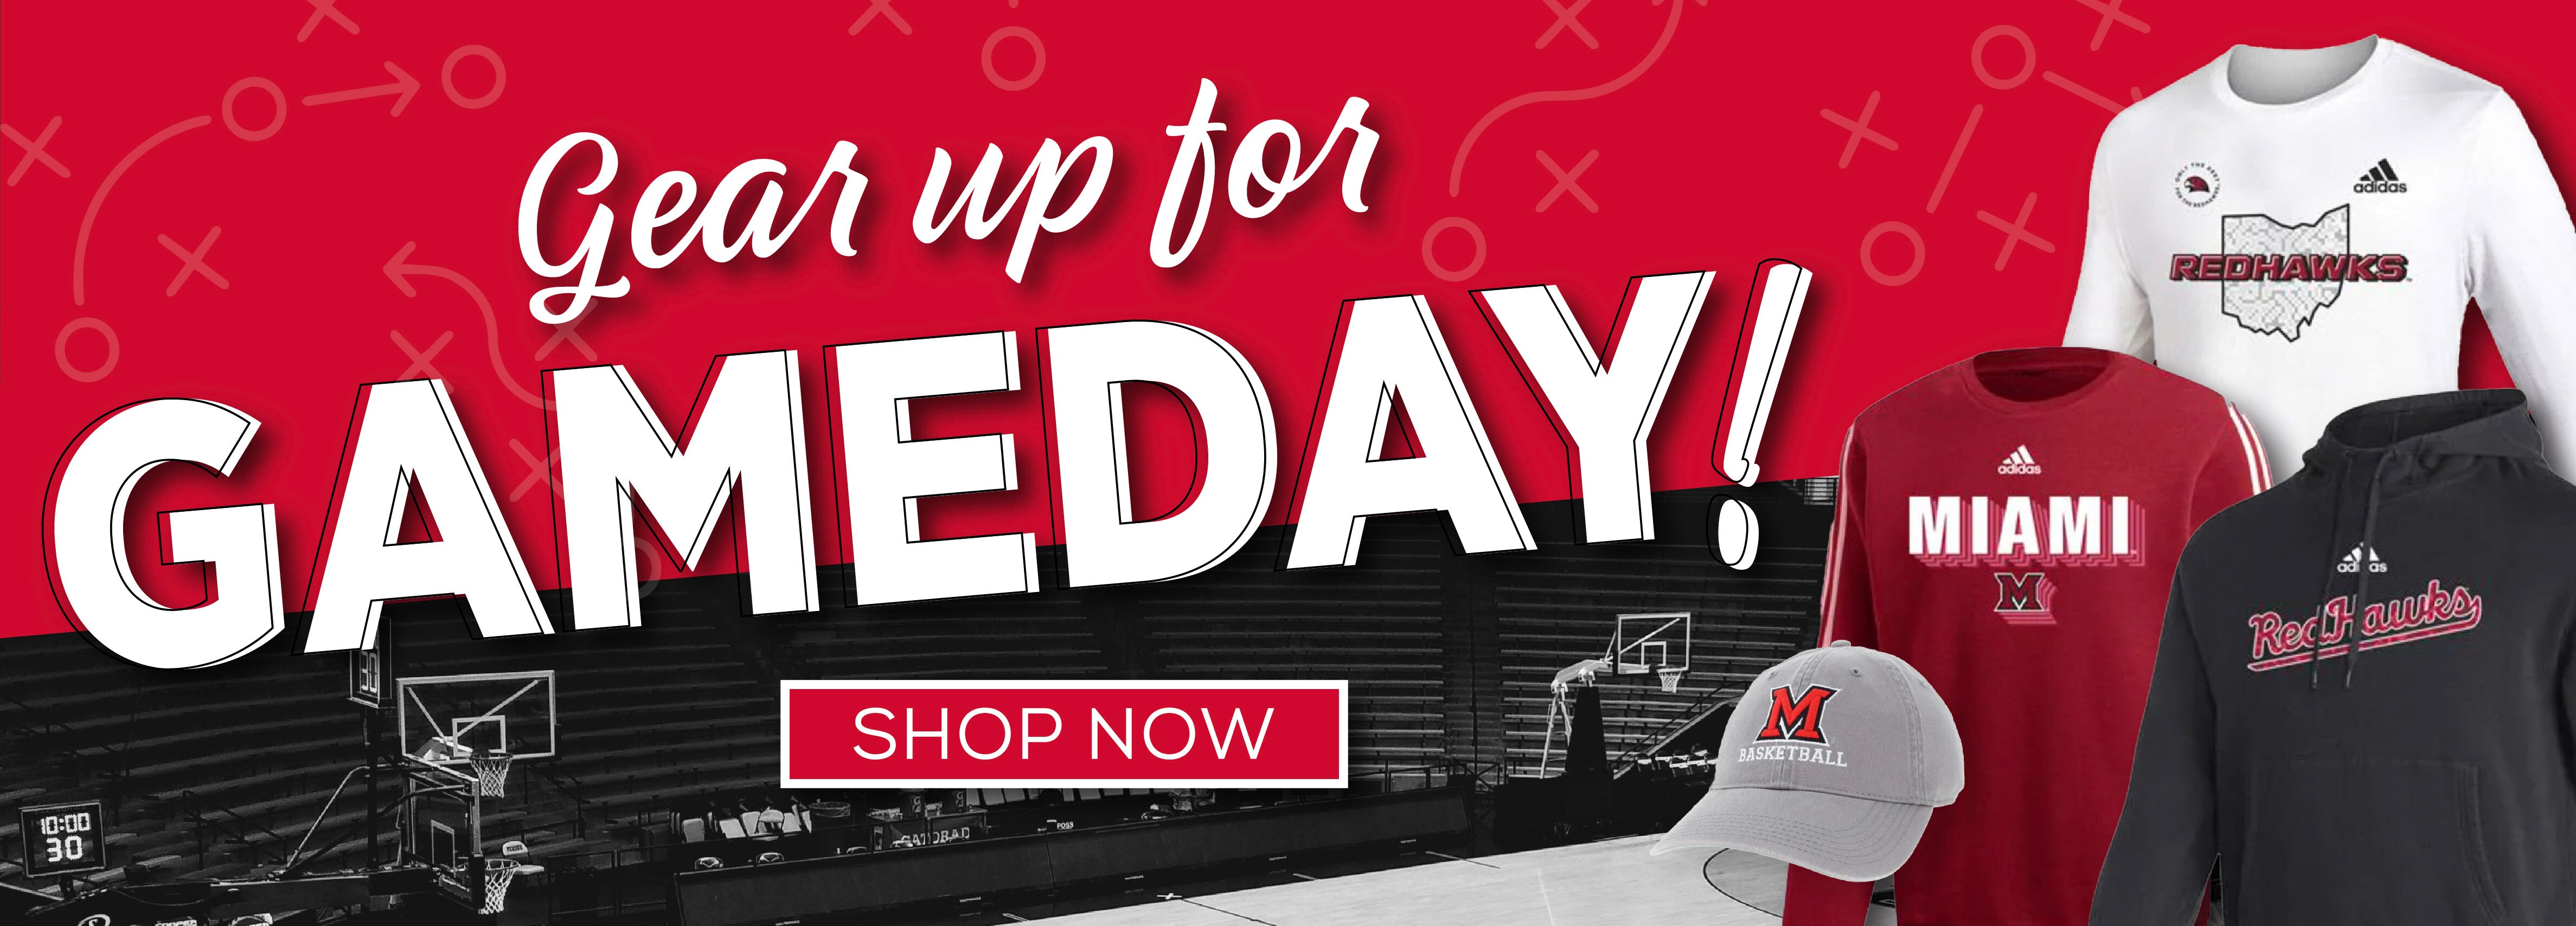 Get Your Gameday Gear! Shop Now